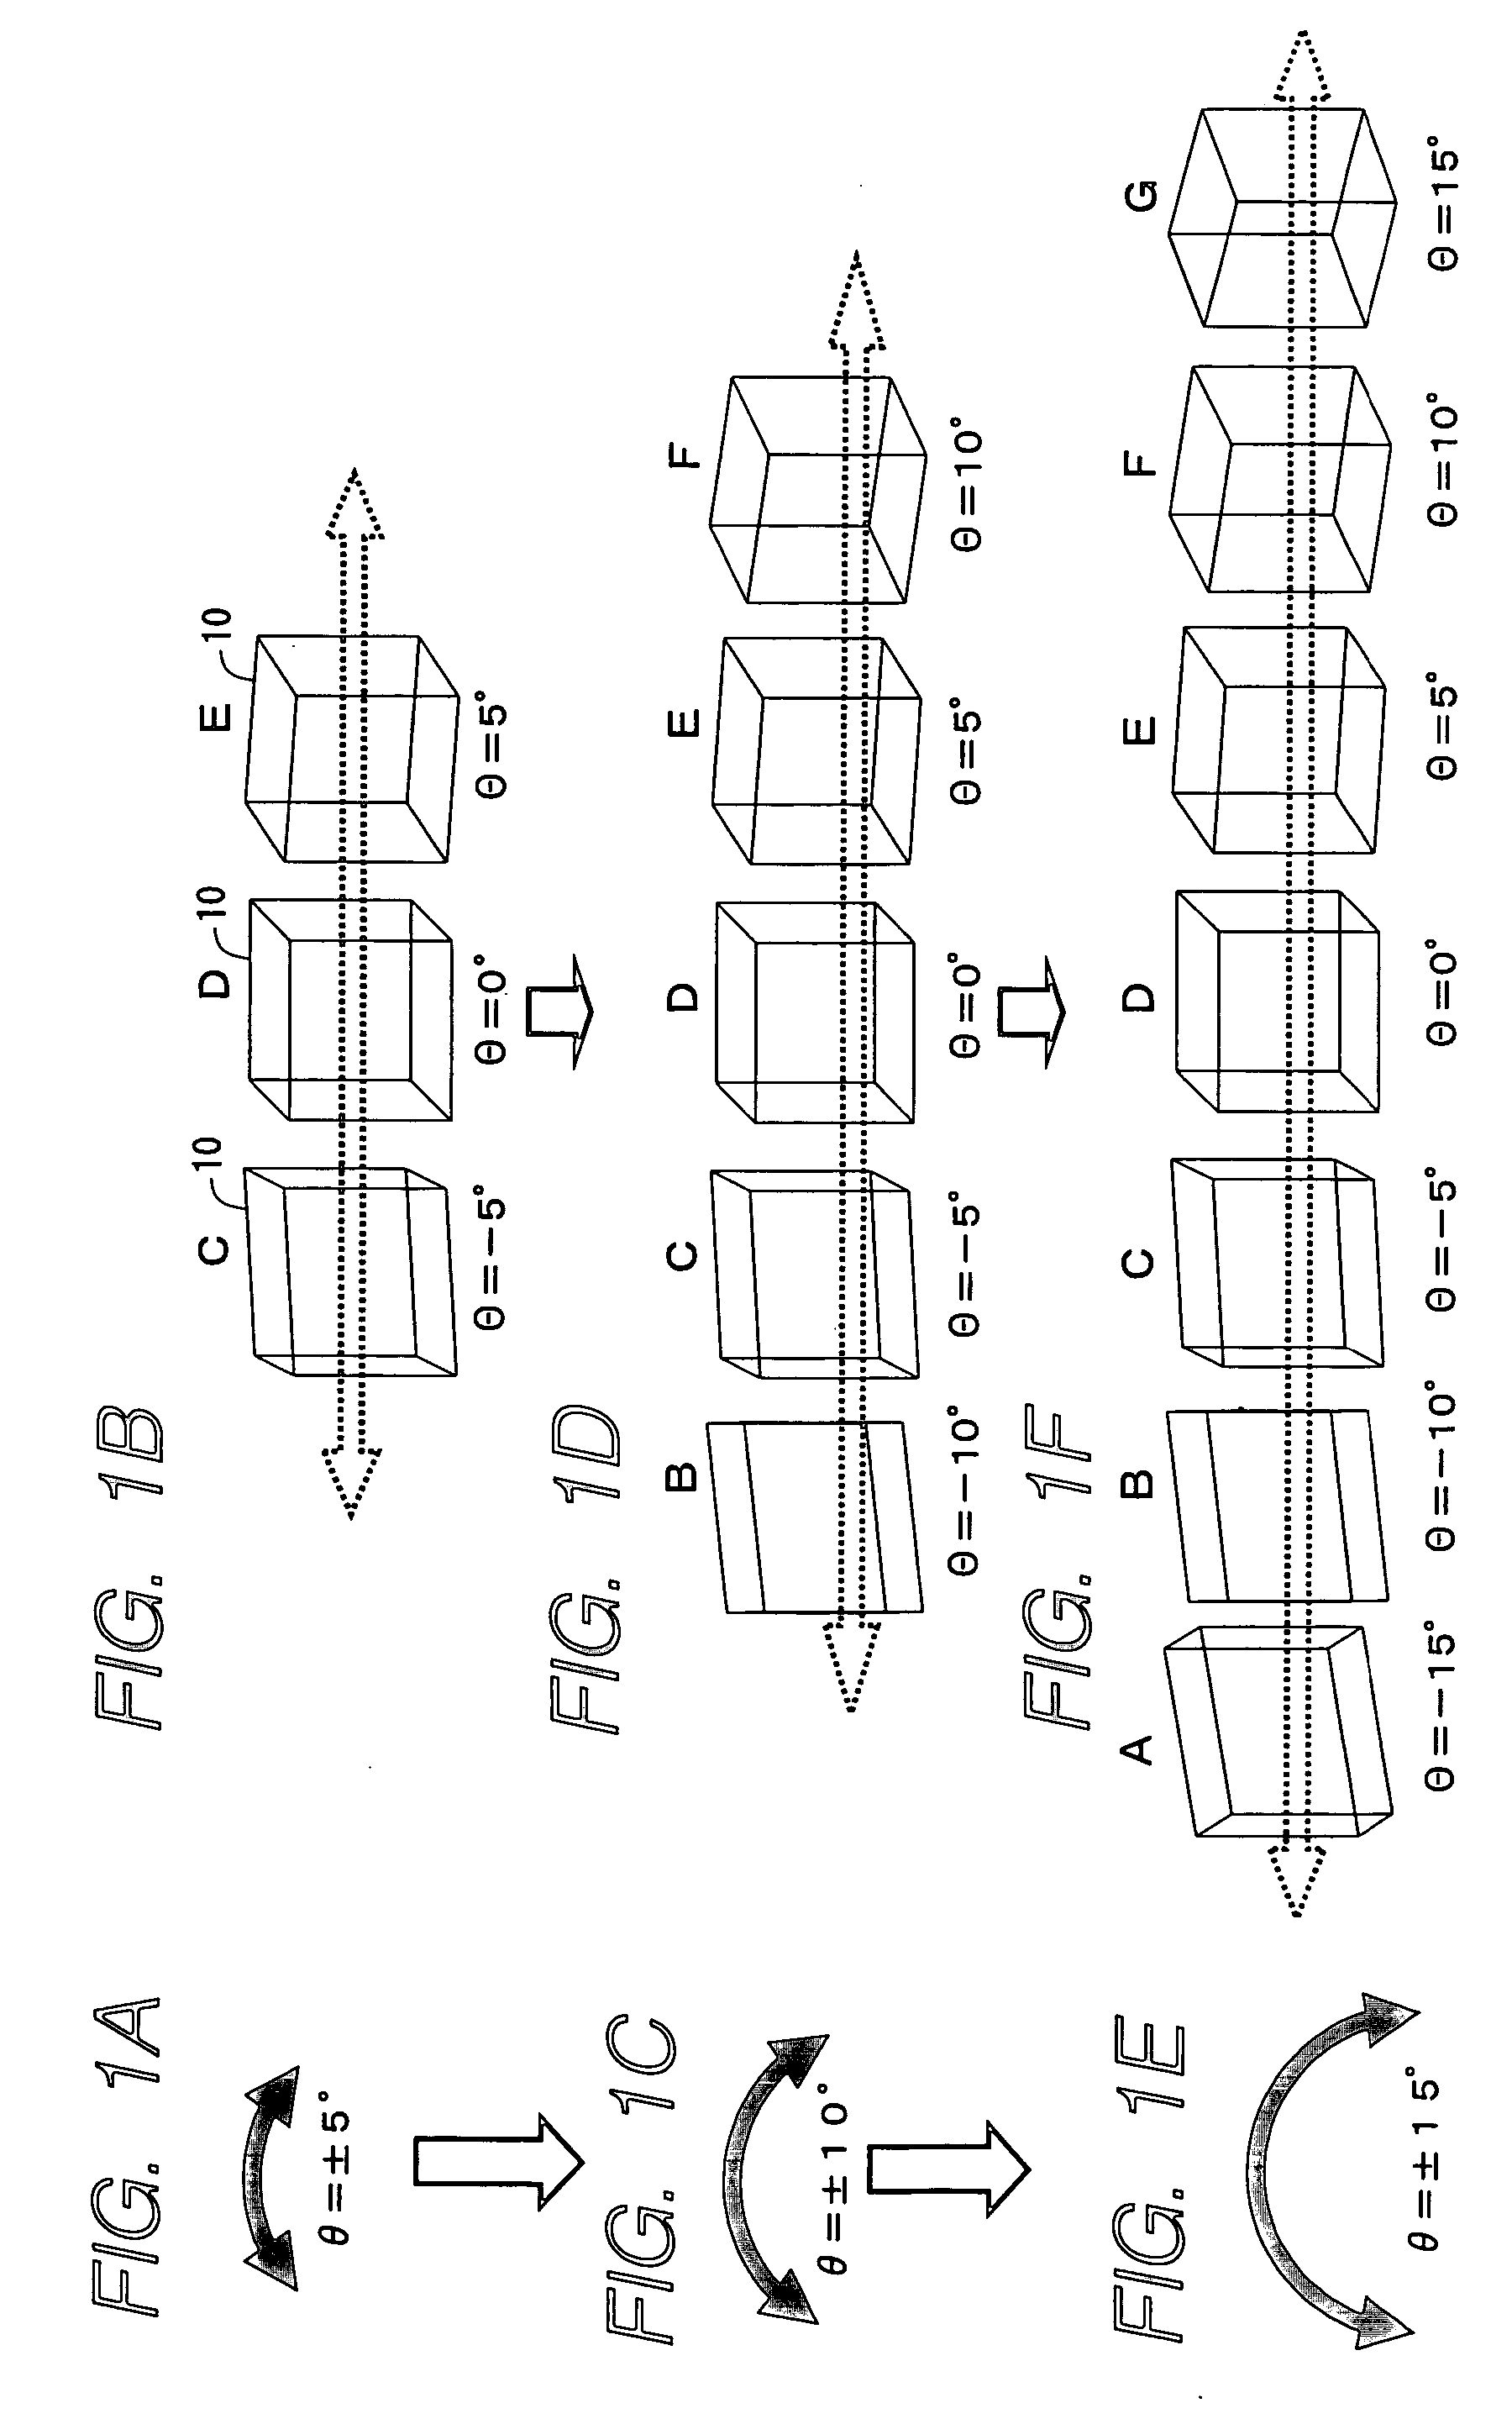 Image processing method and computer readable medium